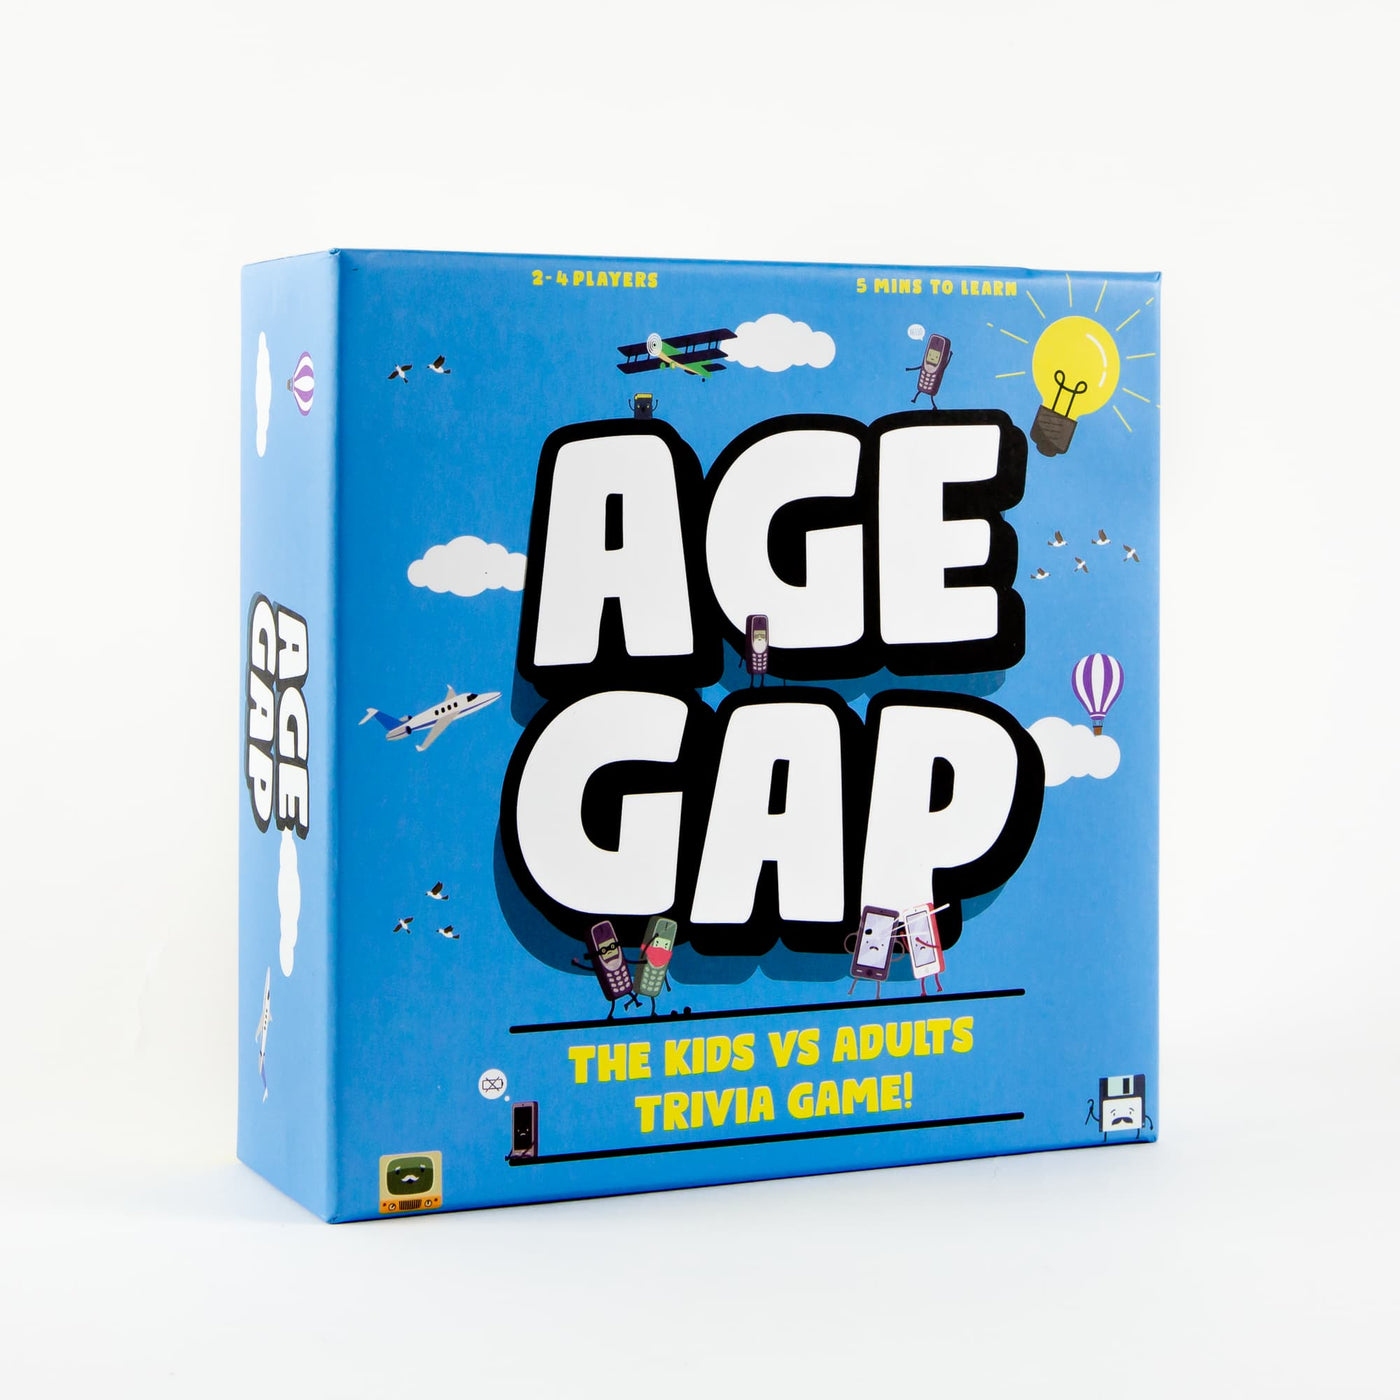 Age Gap - The Kids vs Adults Trivia Game by Crated with Love